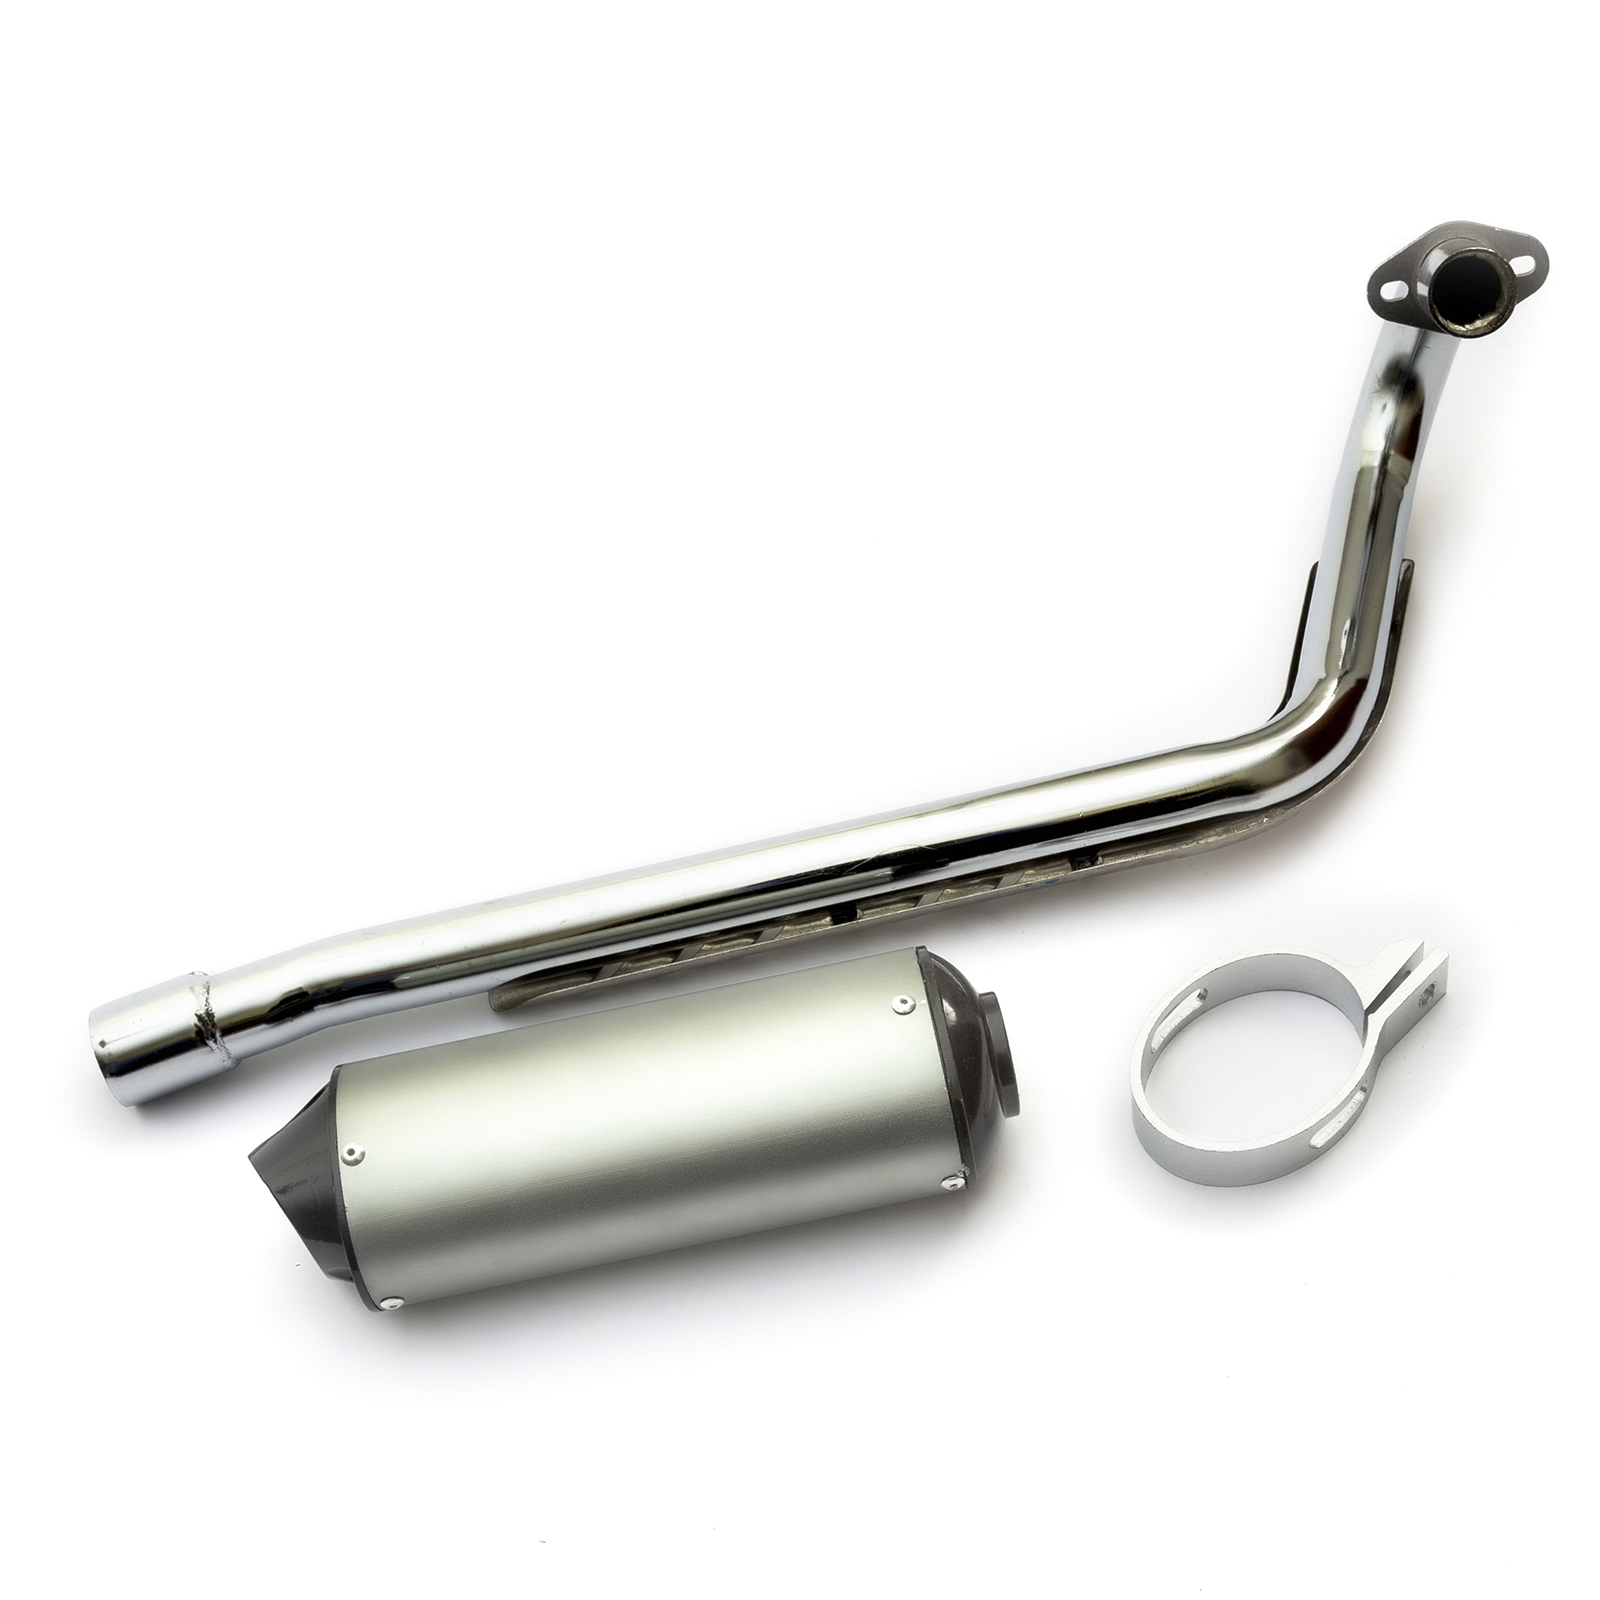 Pitbike Chrome Big Bore Exhaust System Complete For 110cc 125cc 140cc